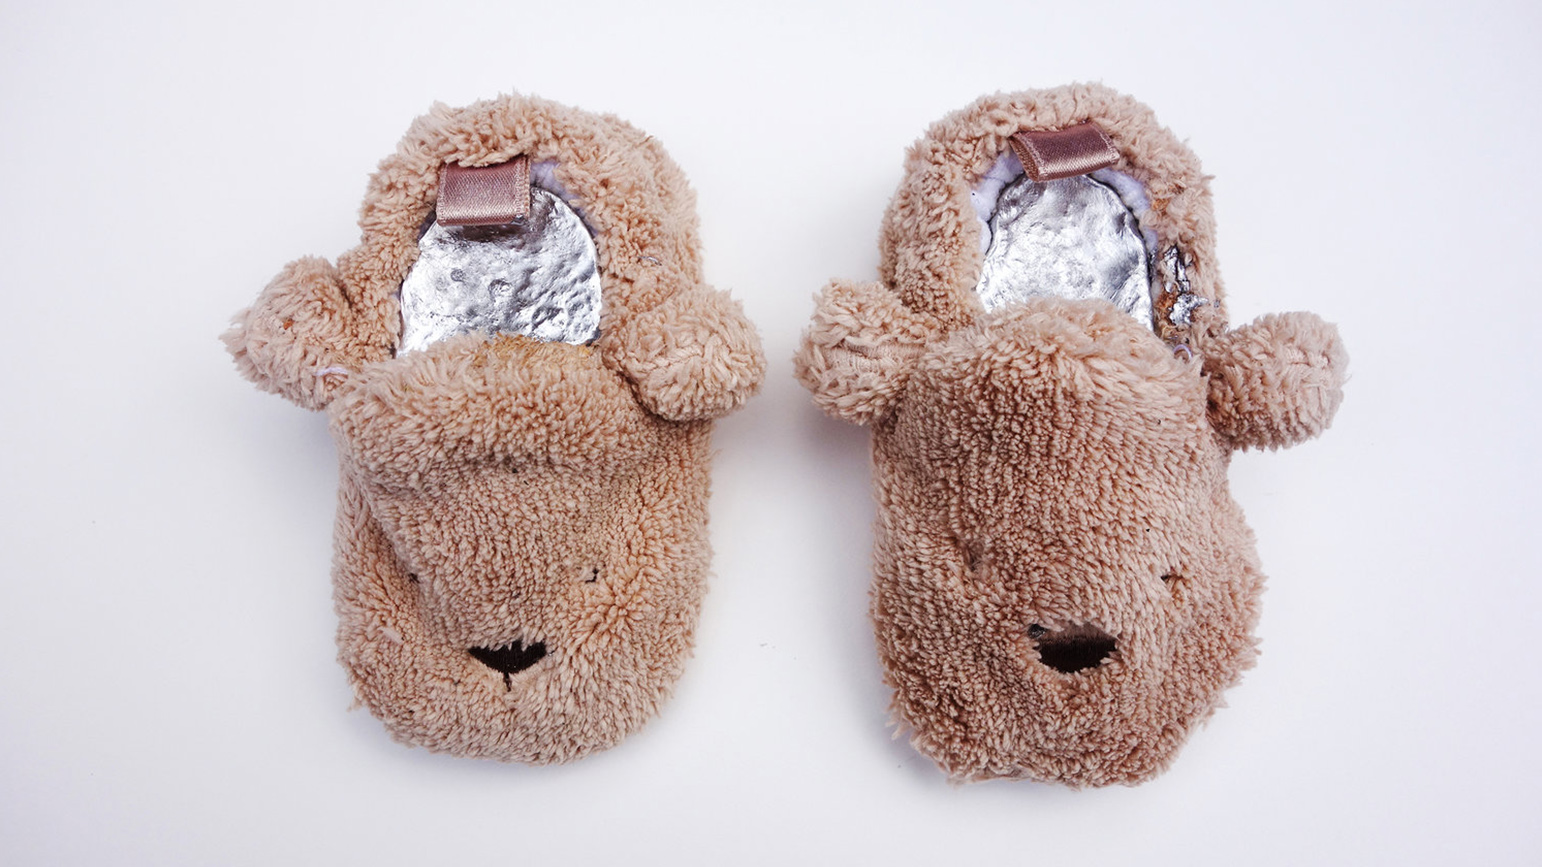 Slippers shaped like bears filled with a metal casting